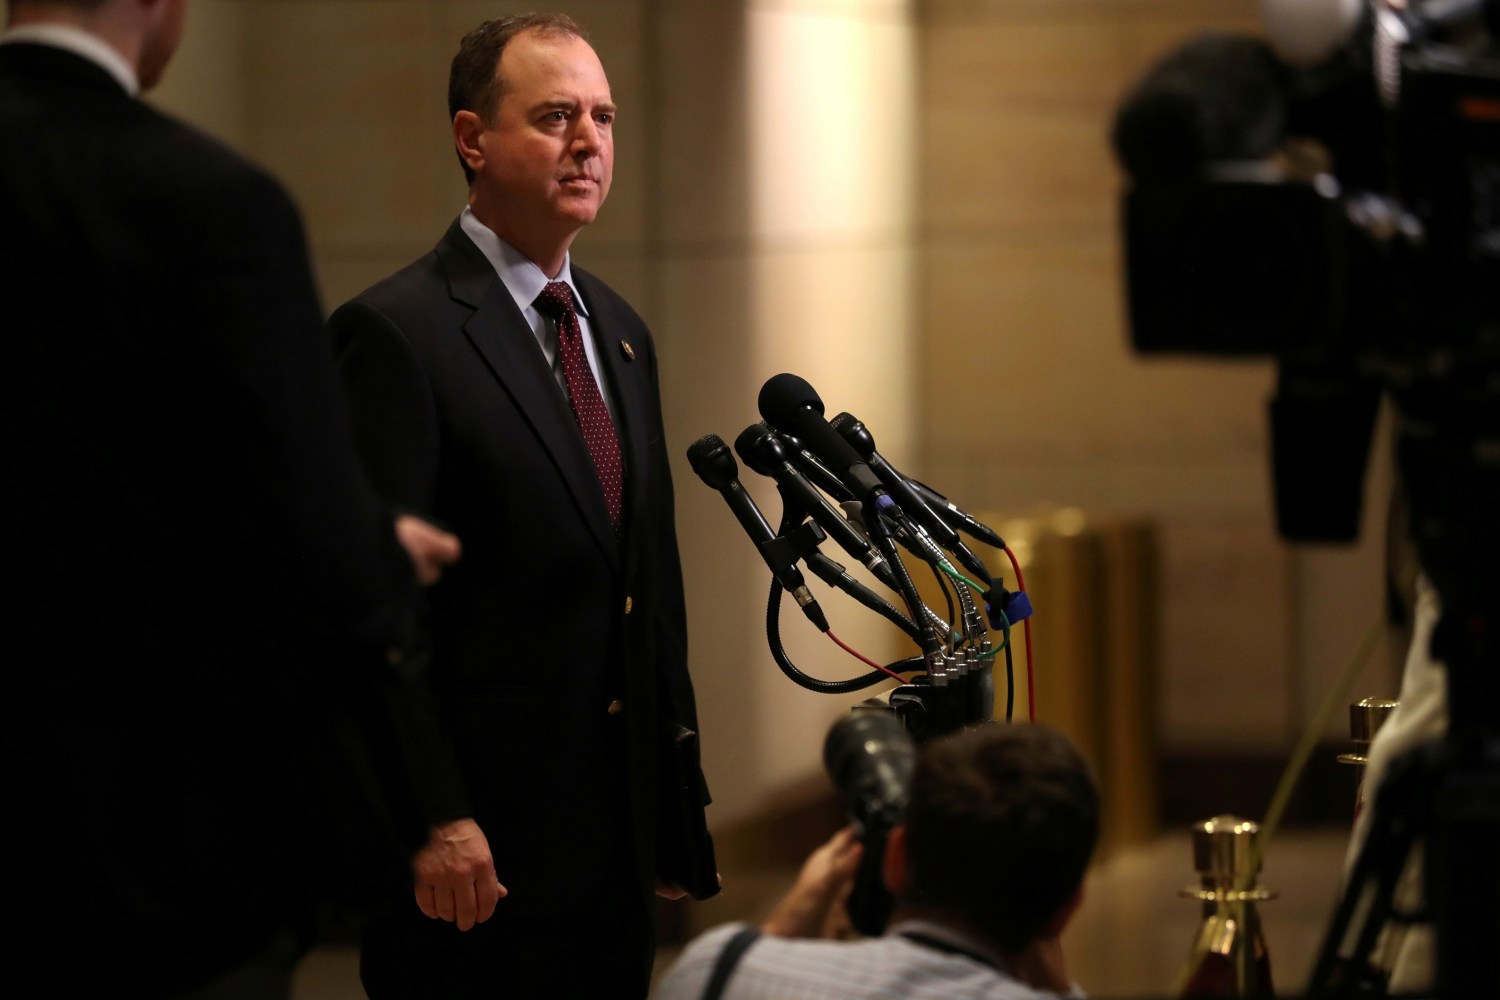 U.S. Representative Adam Schiff, the ranking Democrat on the House Intelligence Committee, talks to reporters as he arrives for U.S. Secretary of Homeland Security Kirstjen Nielsen, FBI Director Christopher Wray and Director of National Intelligence Daniel Coats to brief the U.S. House of Representatives in a classified members-only briefing on election security at the U.S. Capitol in Washington, U.S. May 22, 2018.  REUTERS/Jonathan Ernst - RC1F64BD7DB0